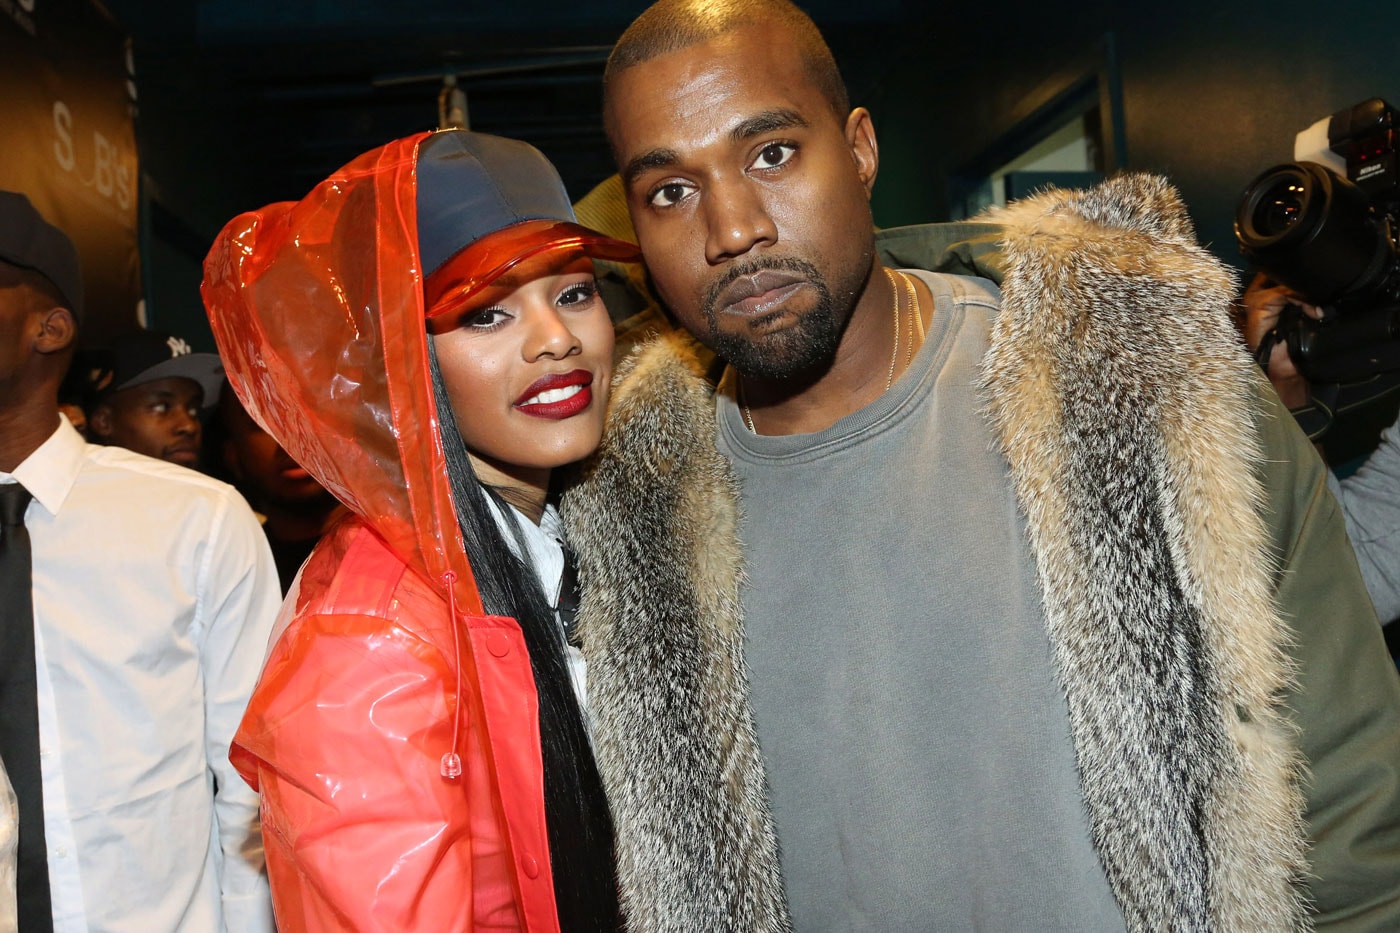 Numero Group Label Kanye West-Produced Teyana Taylor Sample Issues Hold On Not Cleared